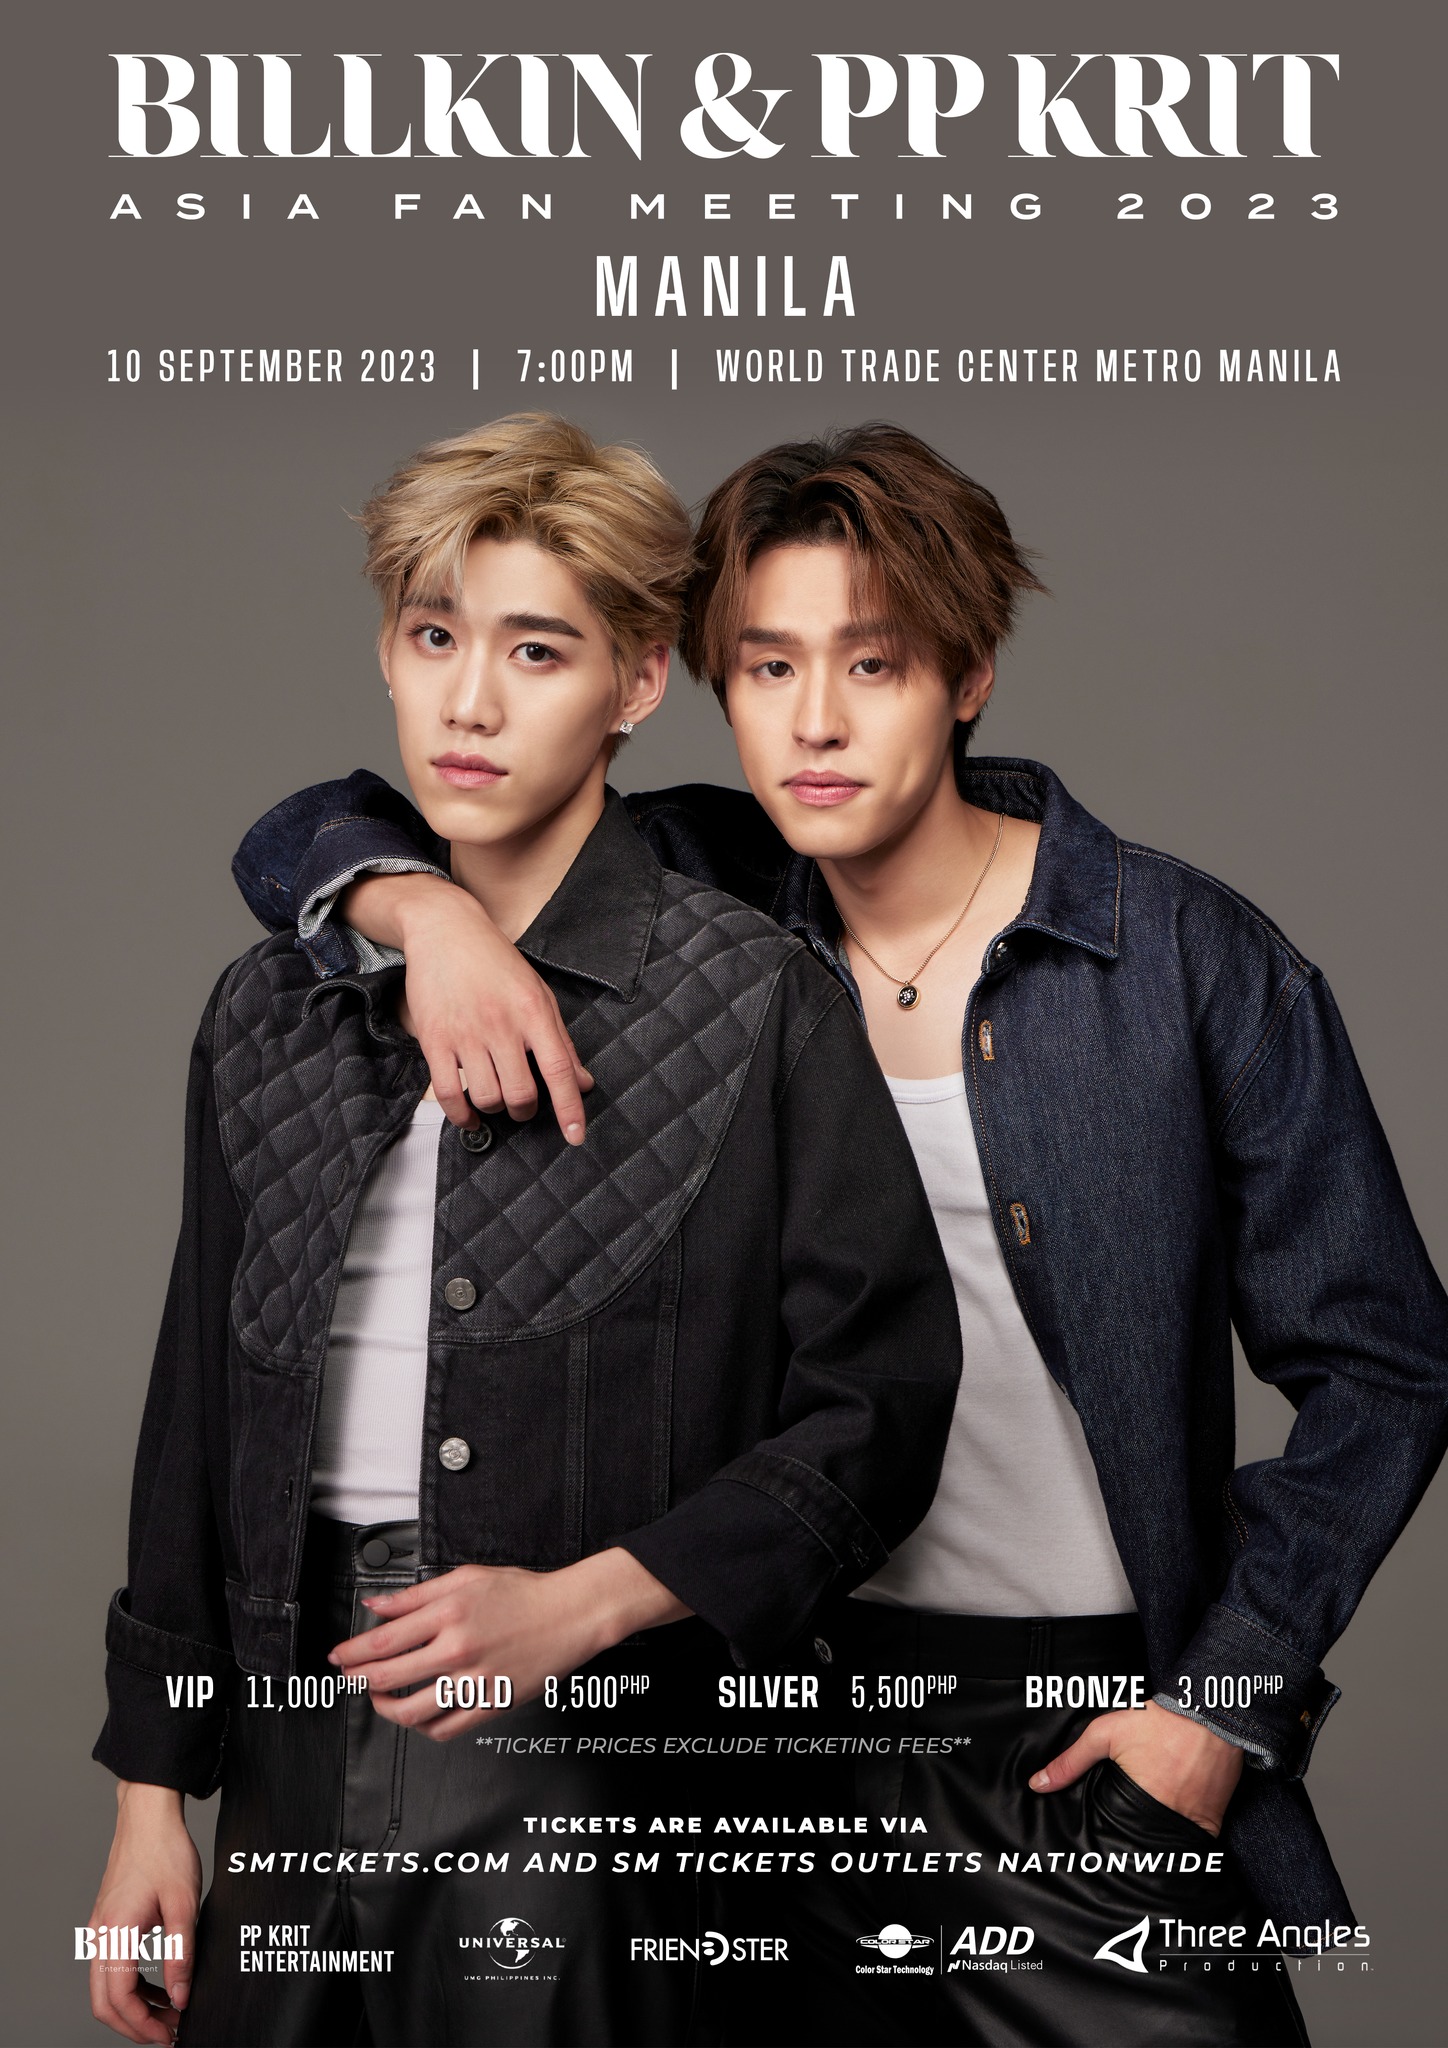 Things to do September 2023 - Billkin and PP Krit Asia Fan Meeting